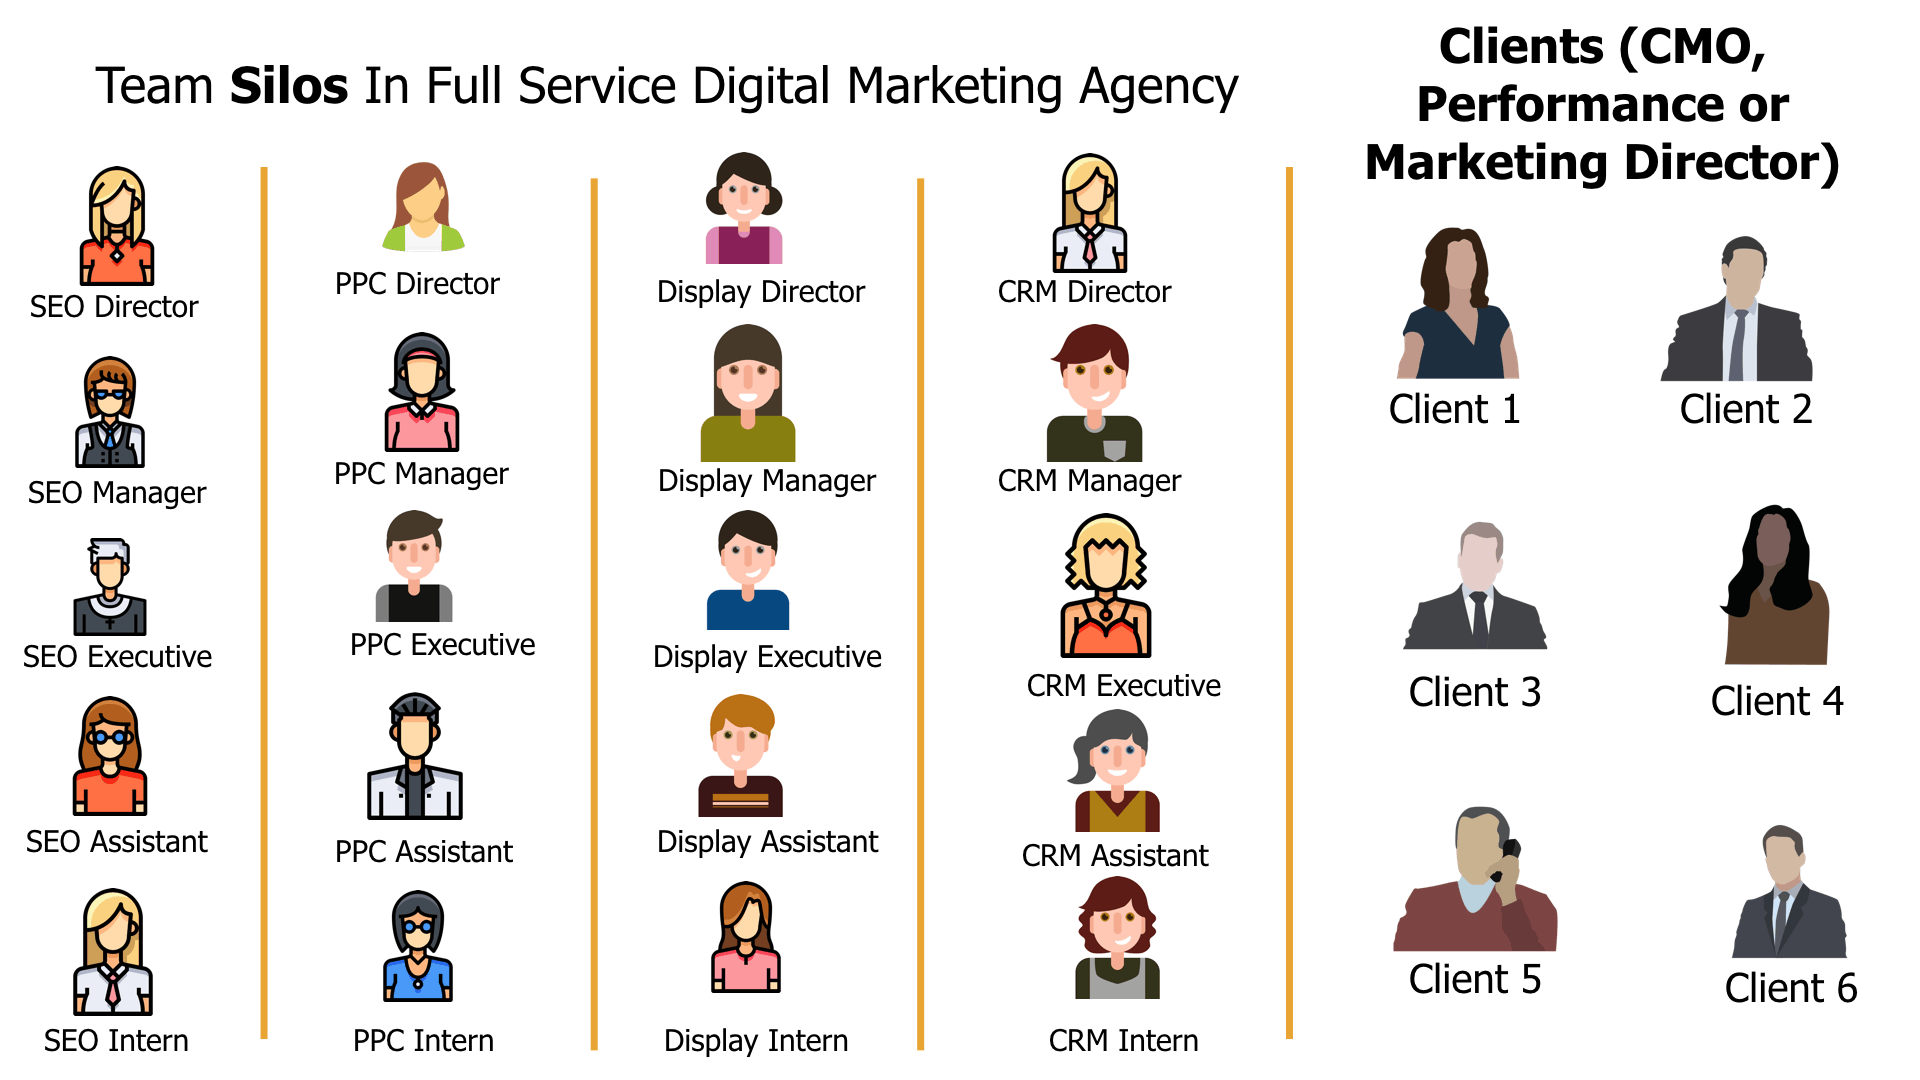 How to Select the Right Digital Marketing Agency to Support In-House Teams